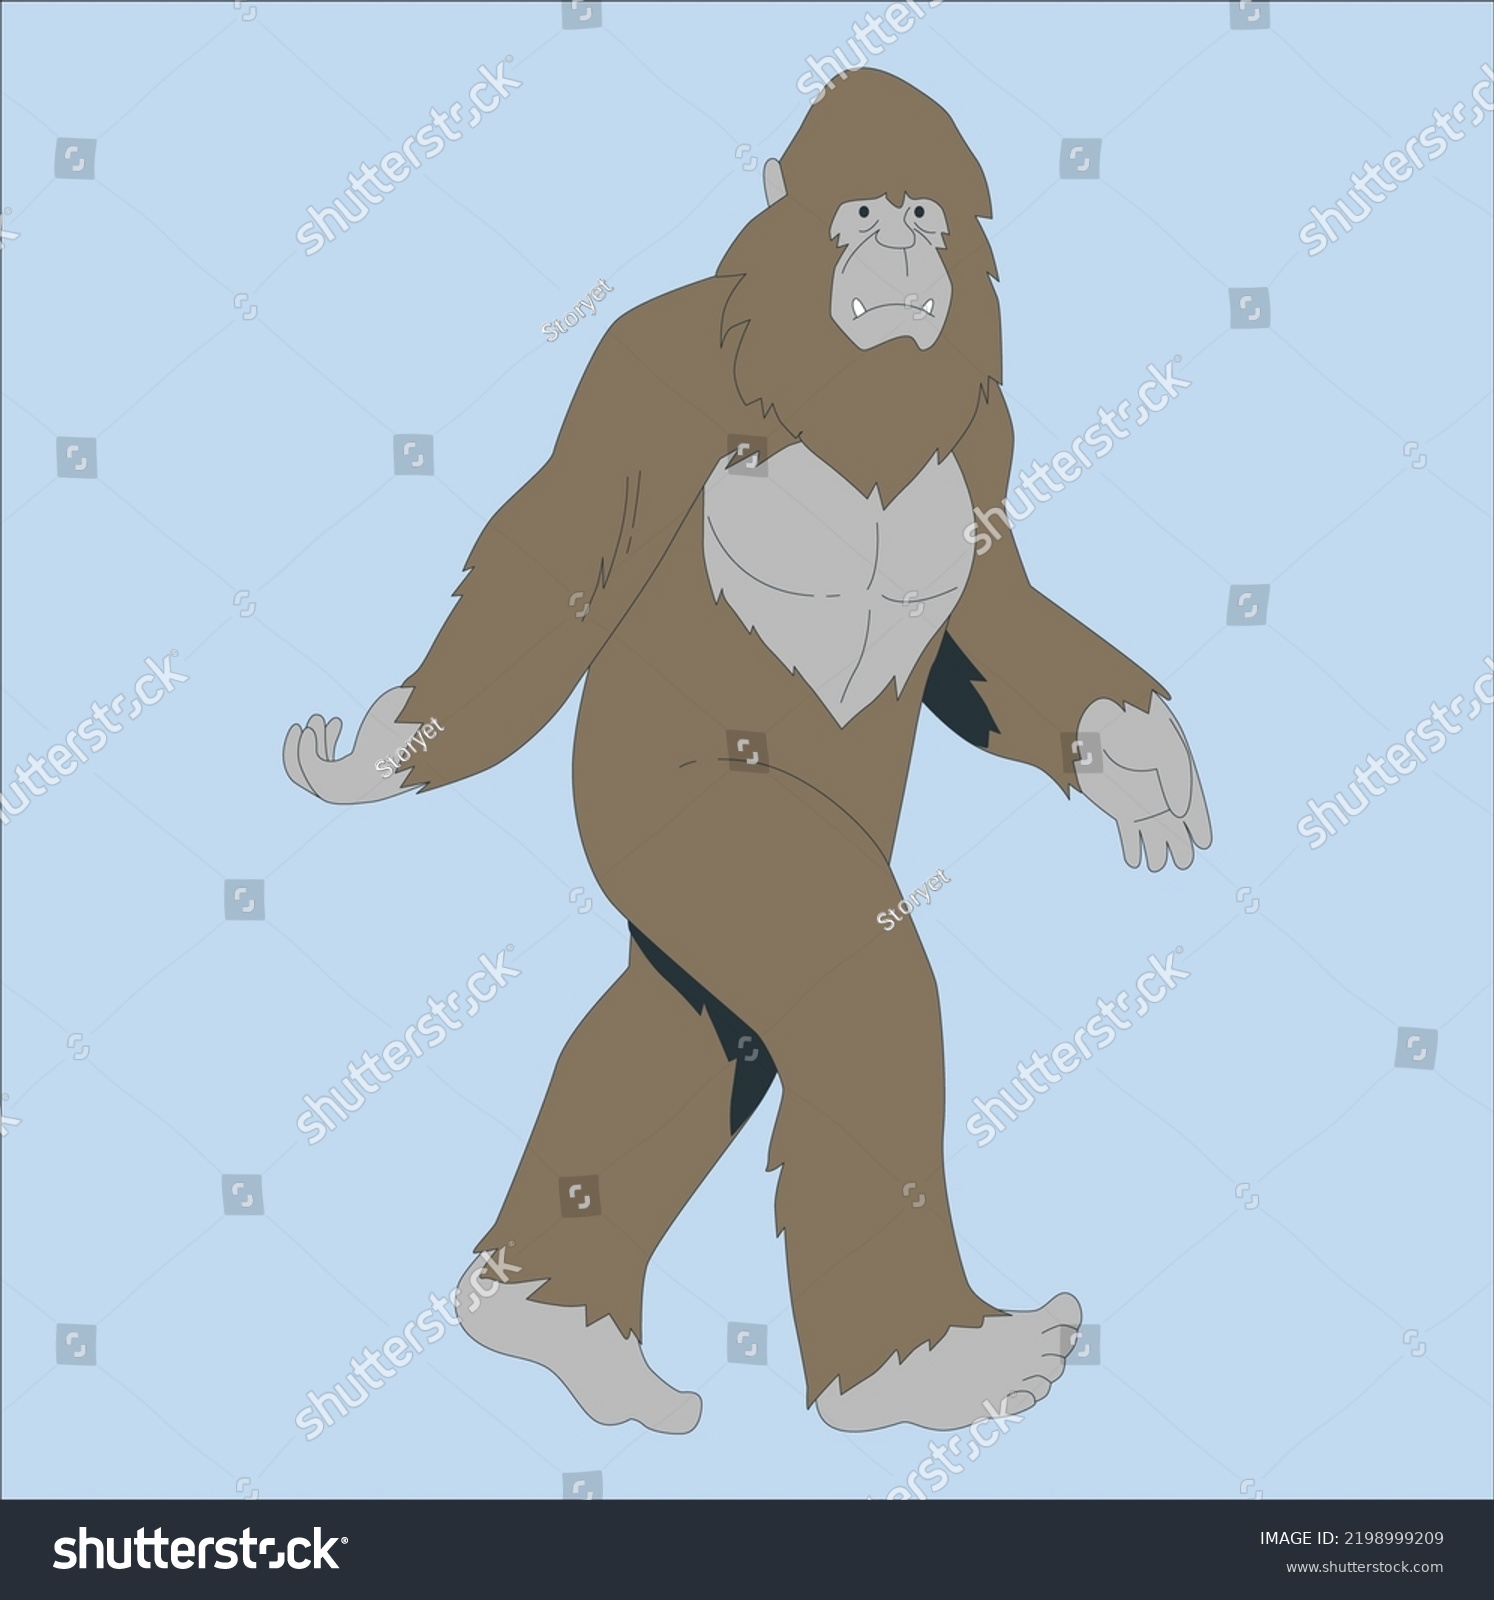 SVG of Sasquatch - Bigfoot - Yeti isolated on white background. The mysterious bigfoot, a creature of folklore and legend, and the most popular cryptid svg